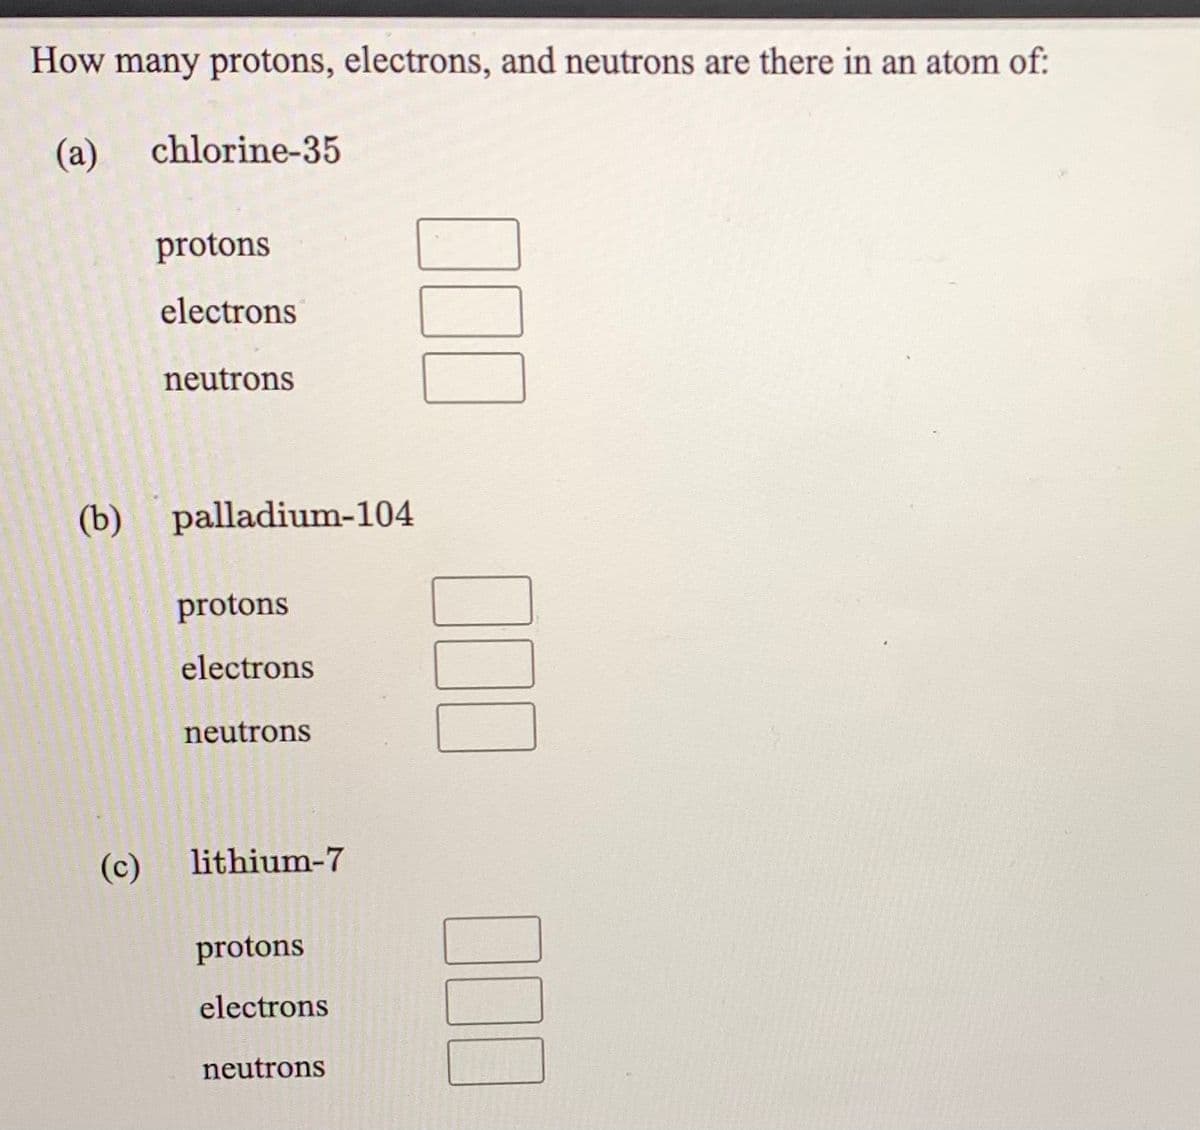 How many protons, electrons, and neutrons are there in an atom of:
(a)
chlorine-35
protons
electrons
neutrons
(b) palladium-104
protons
electrons
neutrons
(c)
lithium-7
protons
electrons
neutrons
00
00
100
